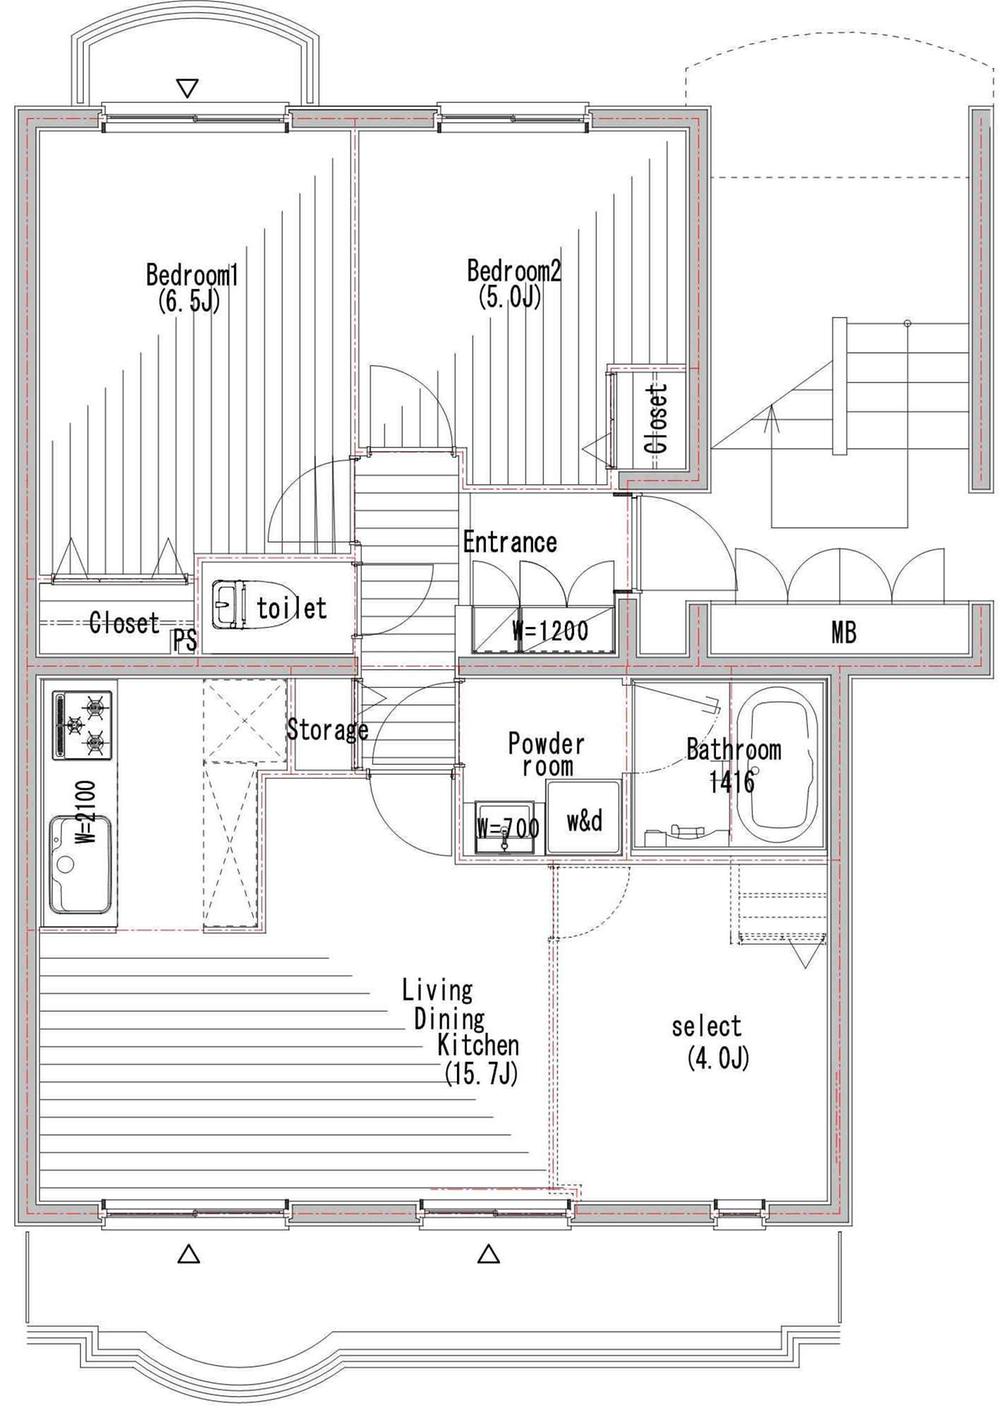 Floor plan. 3LDK, Price 22,800,000 yen, Occupied area 57.64 sq m , Balcony area 9.51 sq m storage also abundantly available. Per yang, Ventilation is good. It has become a spacious living. Easy-to-use.